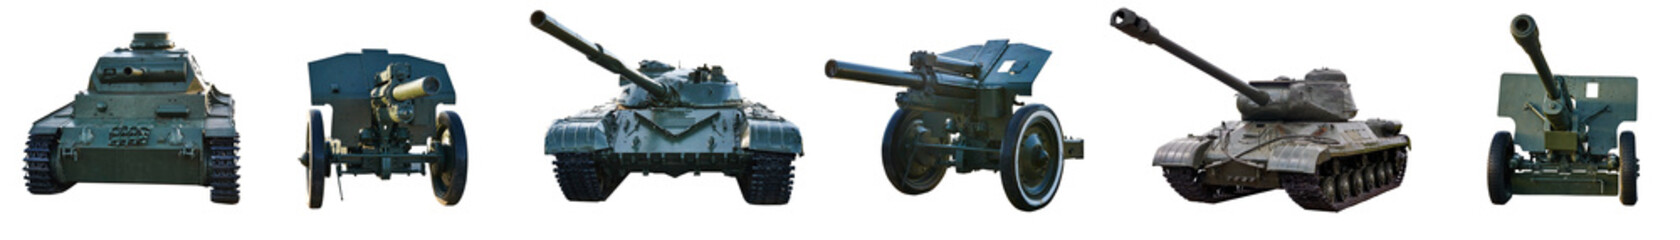 Collage of old military equipment tanks and artillery guns on an isolated white background